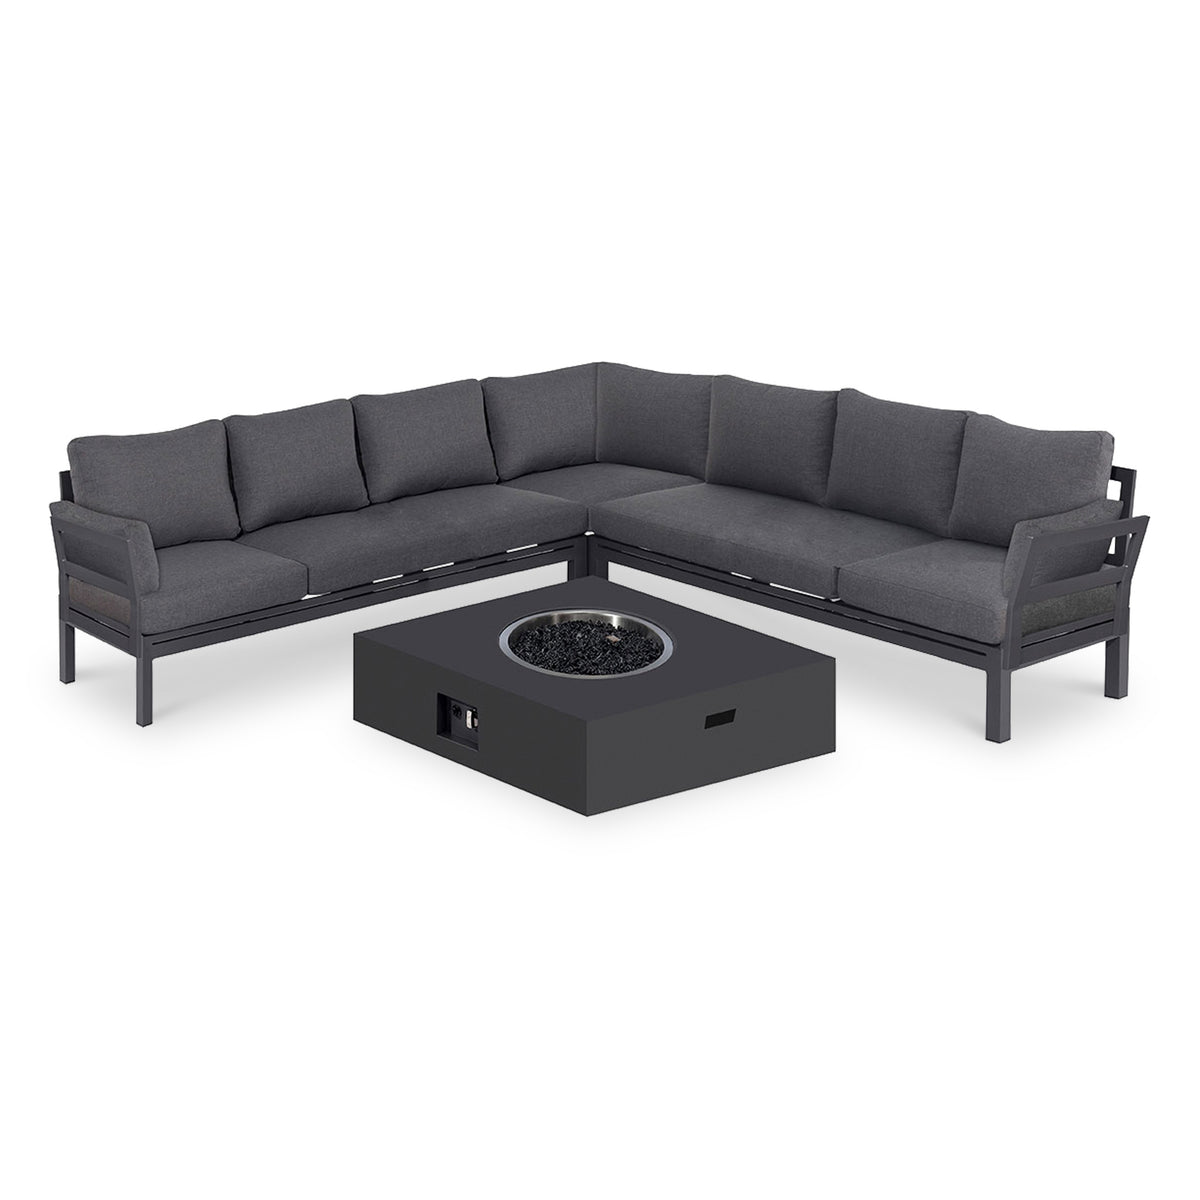 Maze Oslo Large Corner Group with Square Gas Fire Pit Table from Roseland Furniture